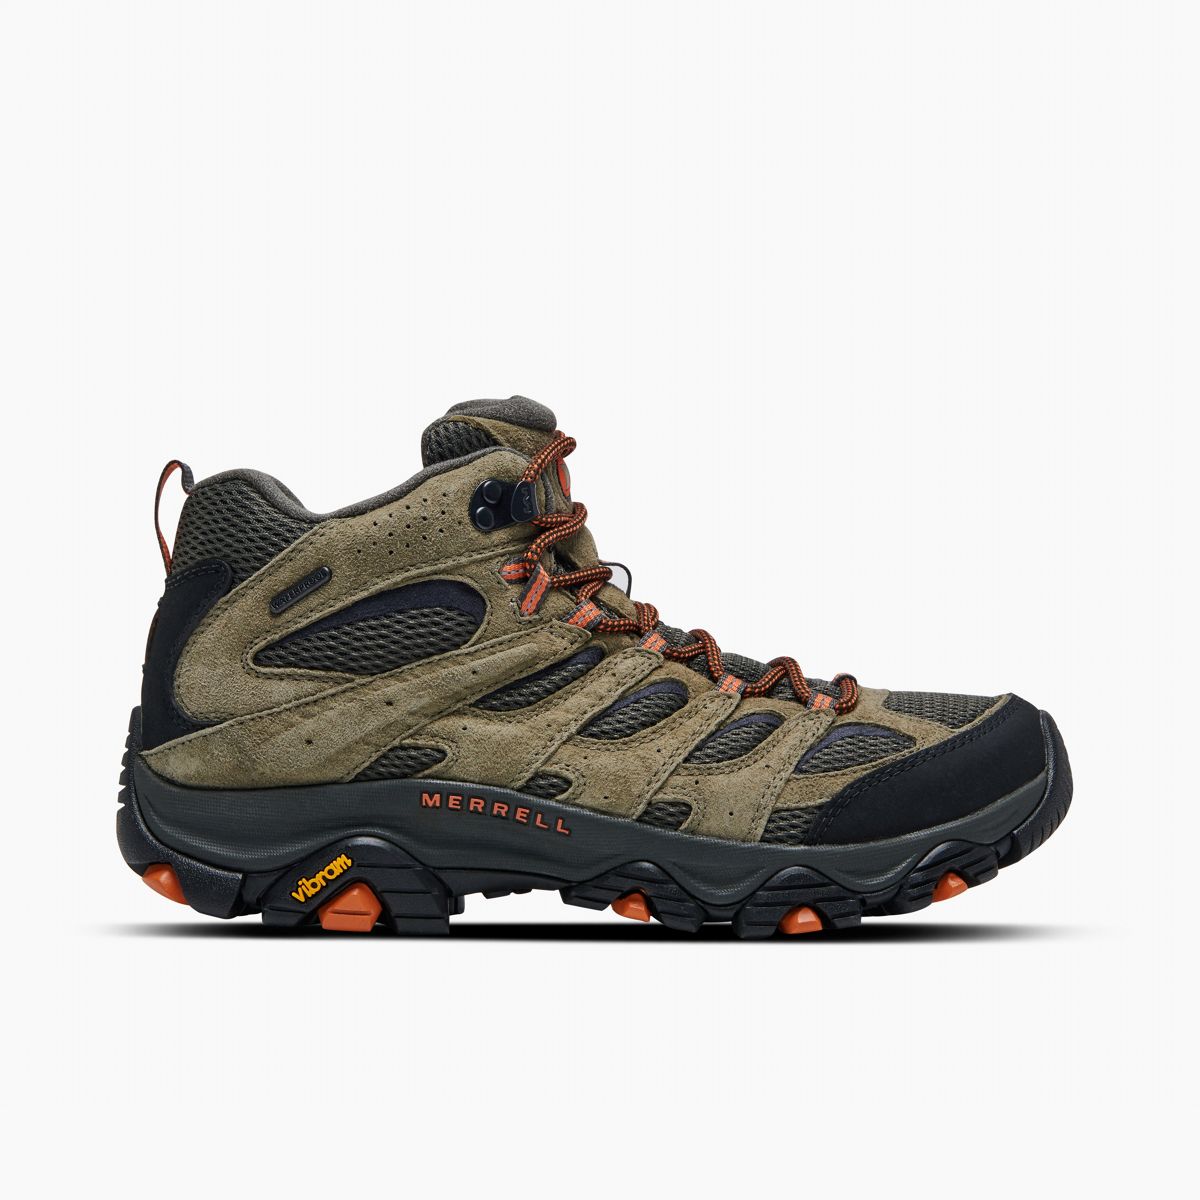 Merrell Moab 3 Mid Hiking Boot Review